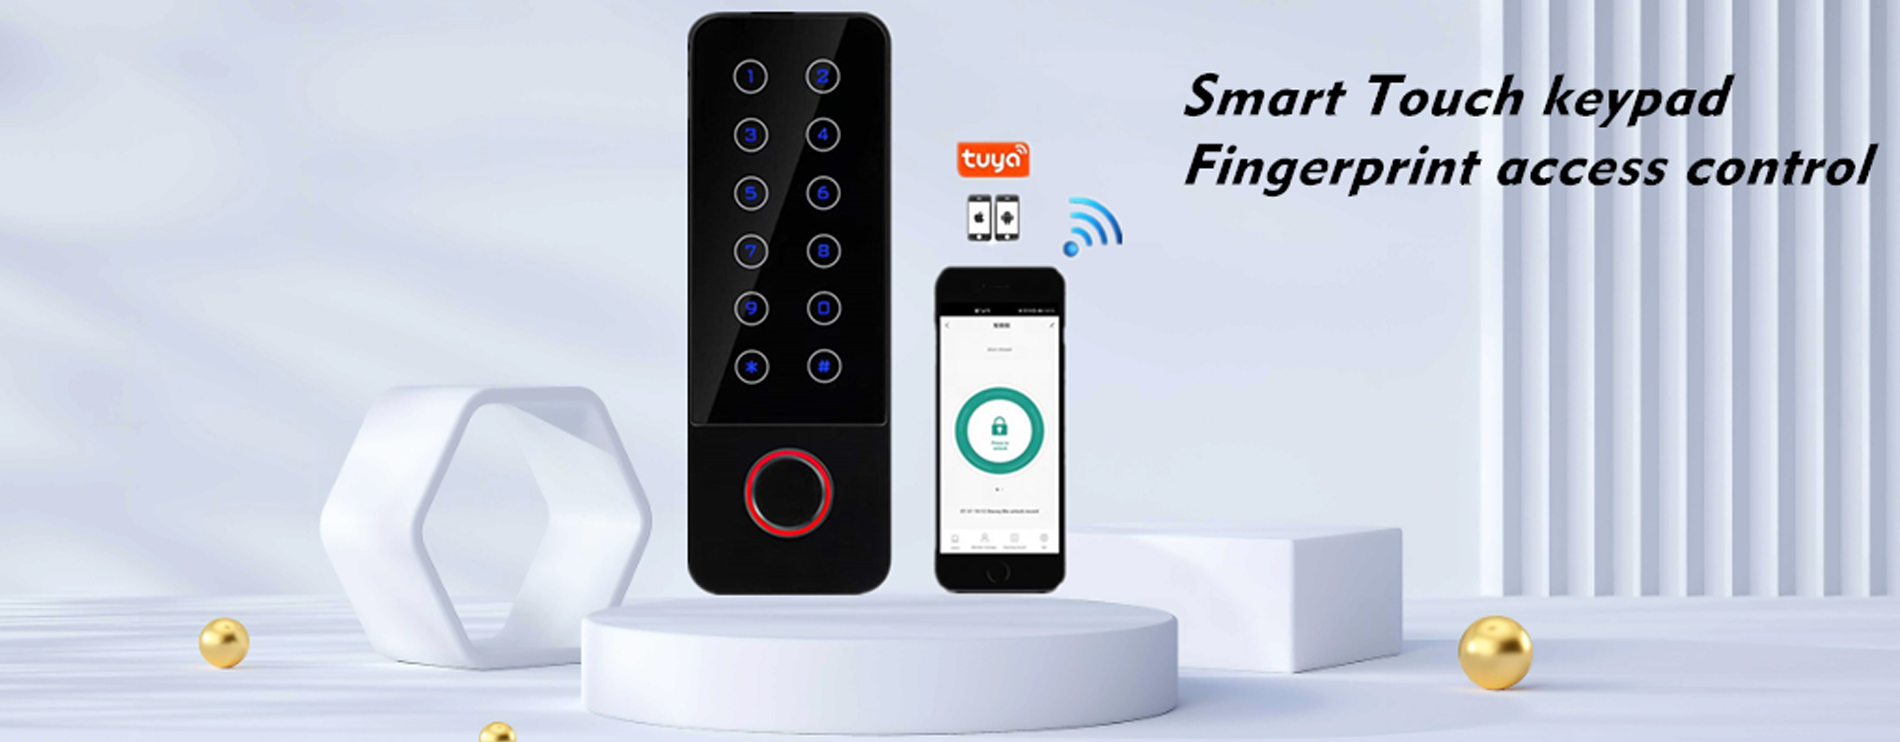 Tuya Smart WiFi Access Control Systems with Em and MIFARE-Touch